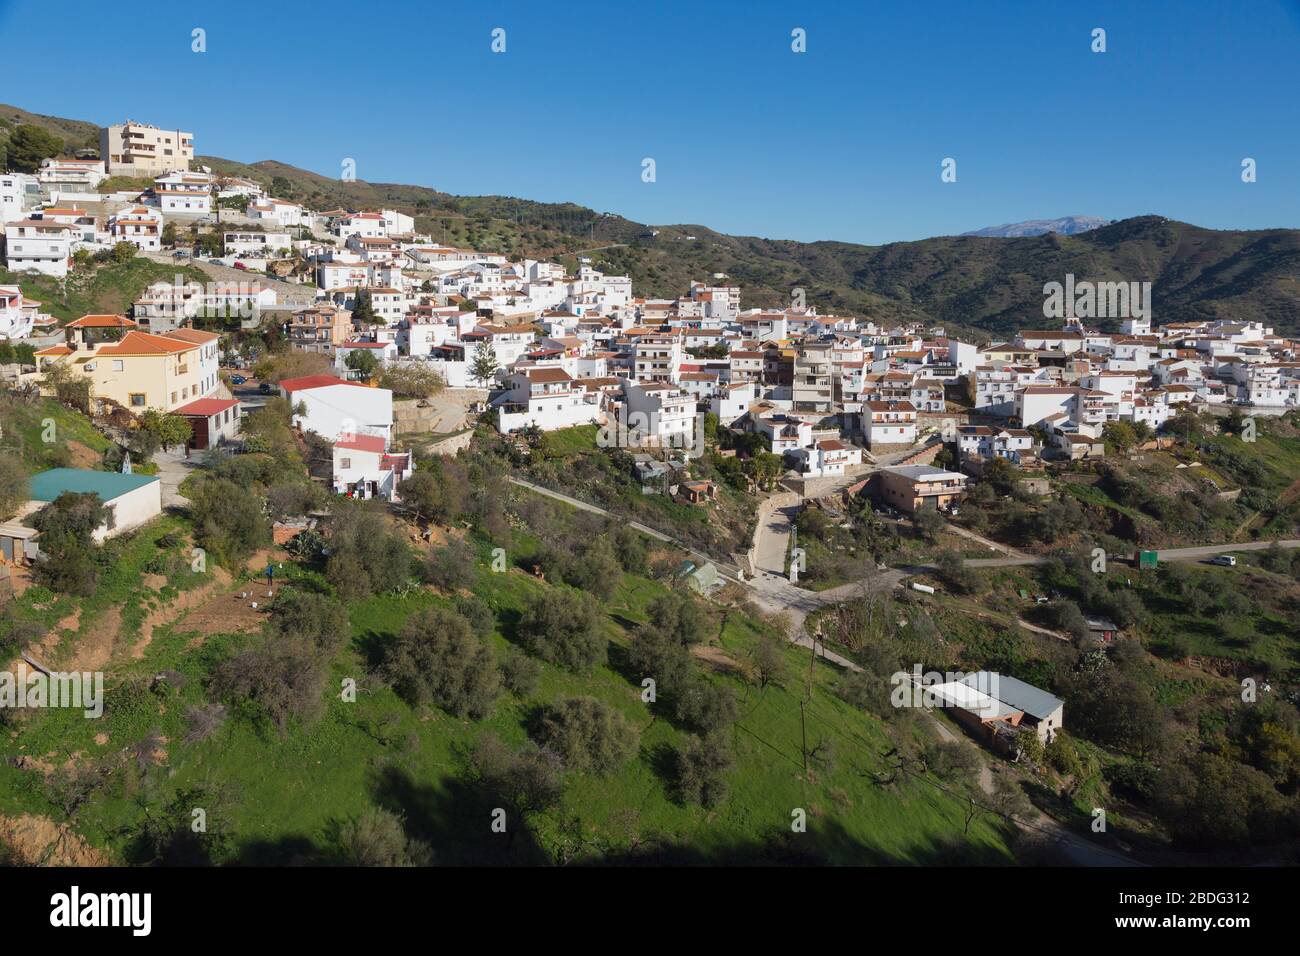 Moclinejo, Axarquia, Malaga Province, Andalusia, southern Spain. Typical white washed mountain village in the Axarquia region of Malaga Province. Stock Photo